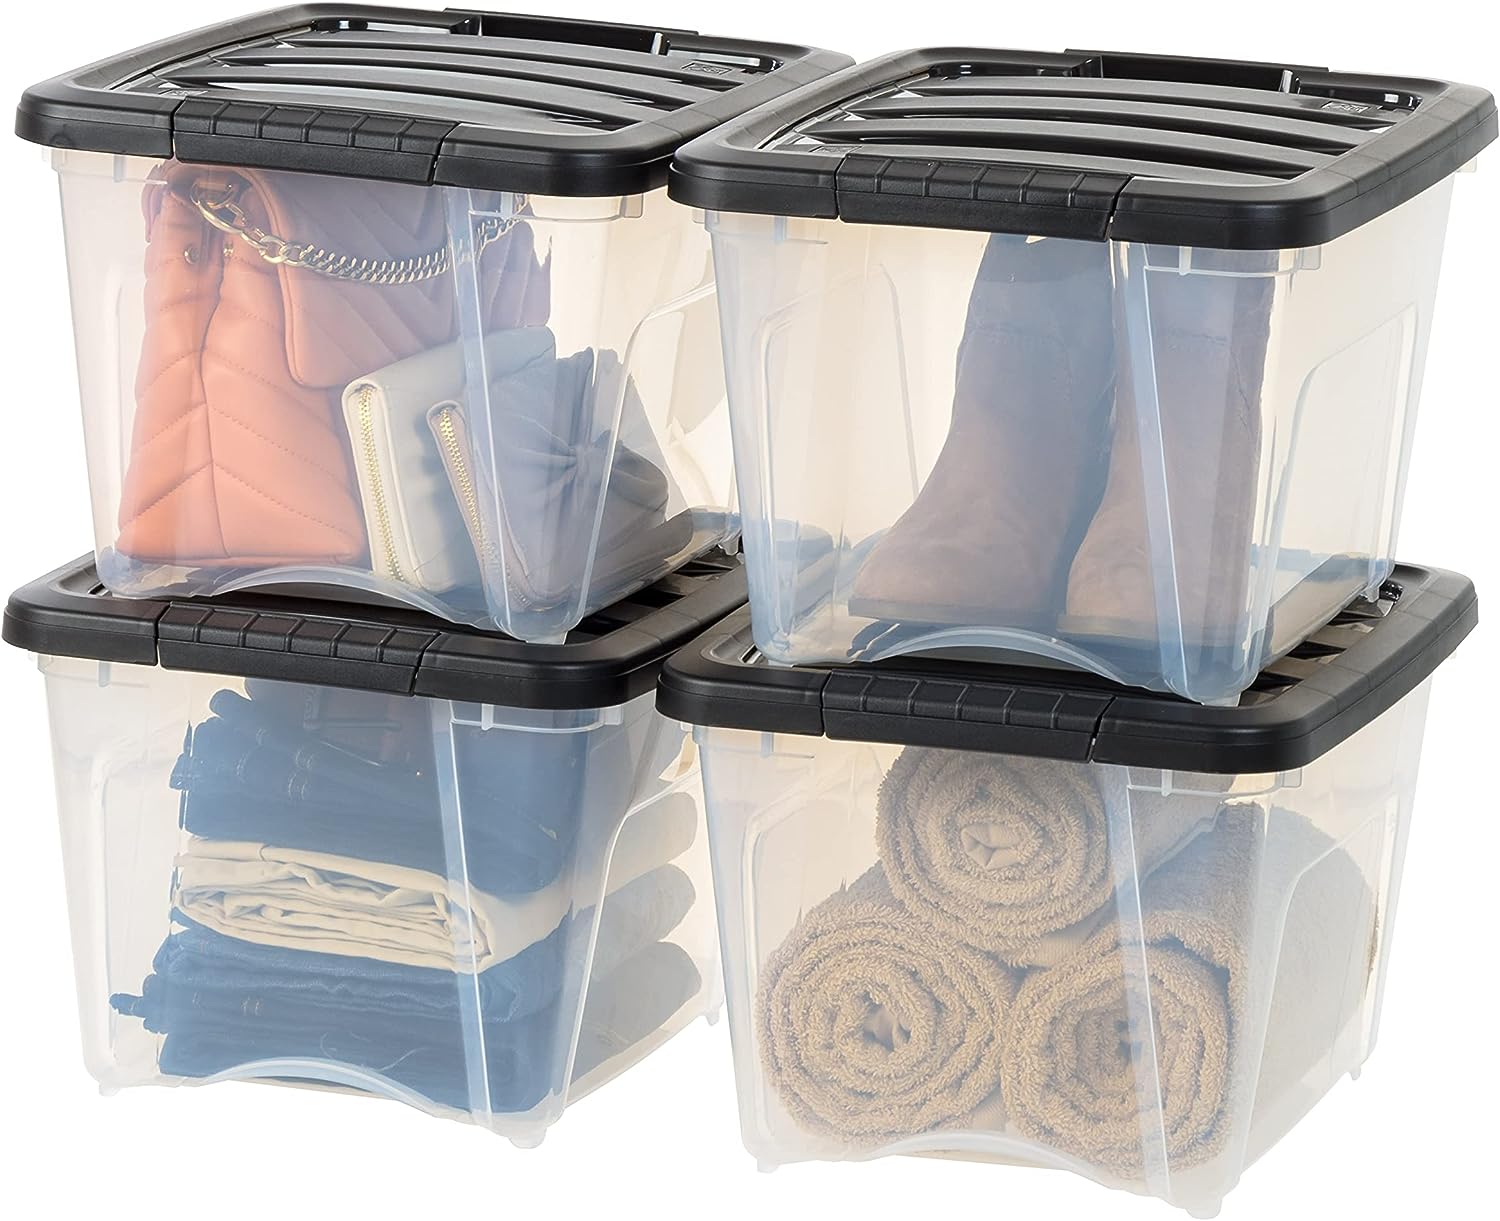 Iris USA 4 Pack 32qt Clear View Plastic Storage Bin with Lid and Secure Latching Buckles